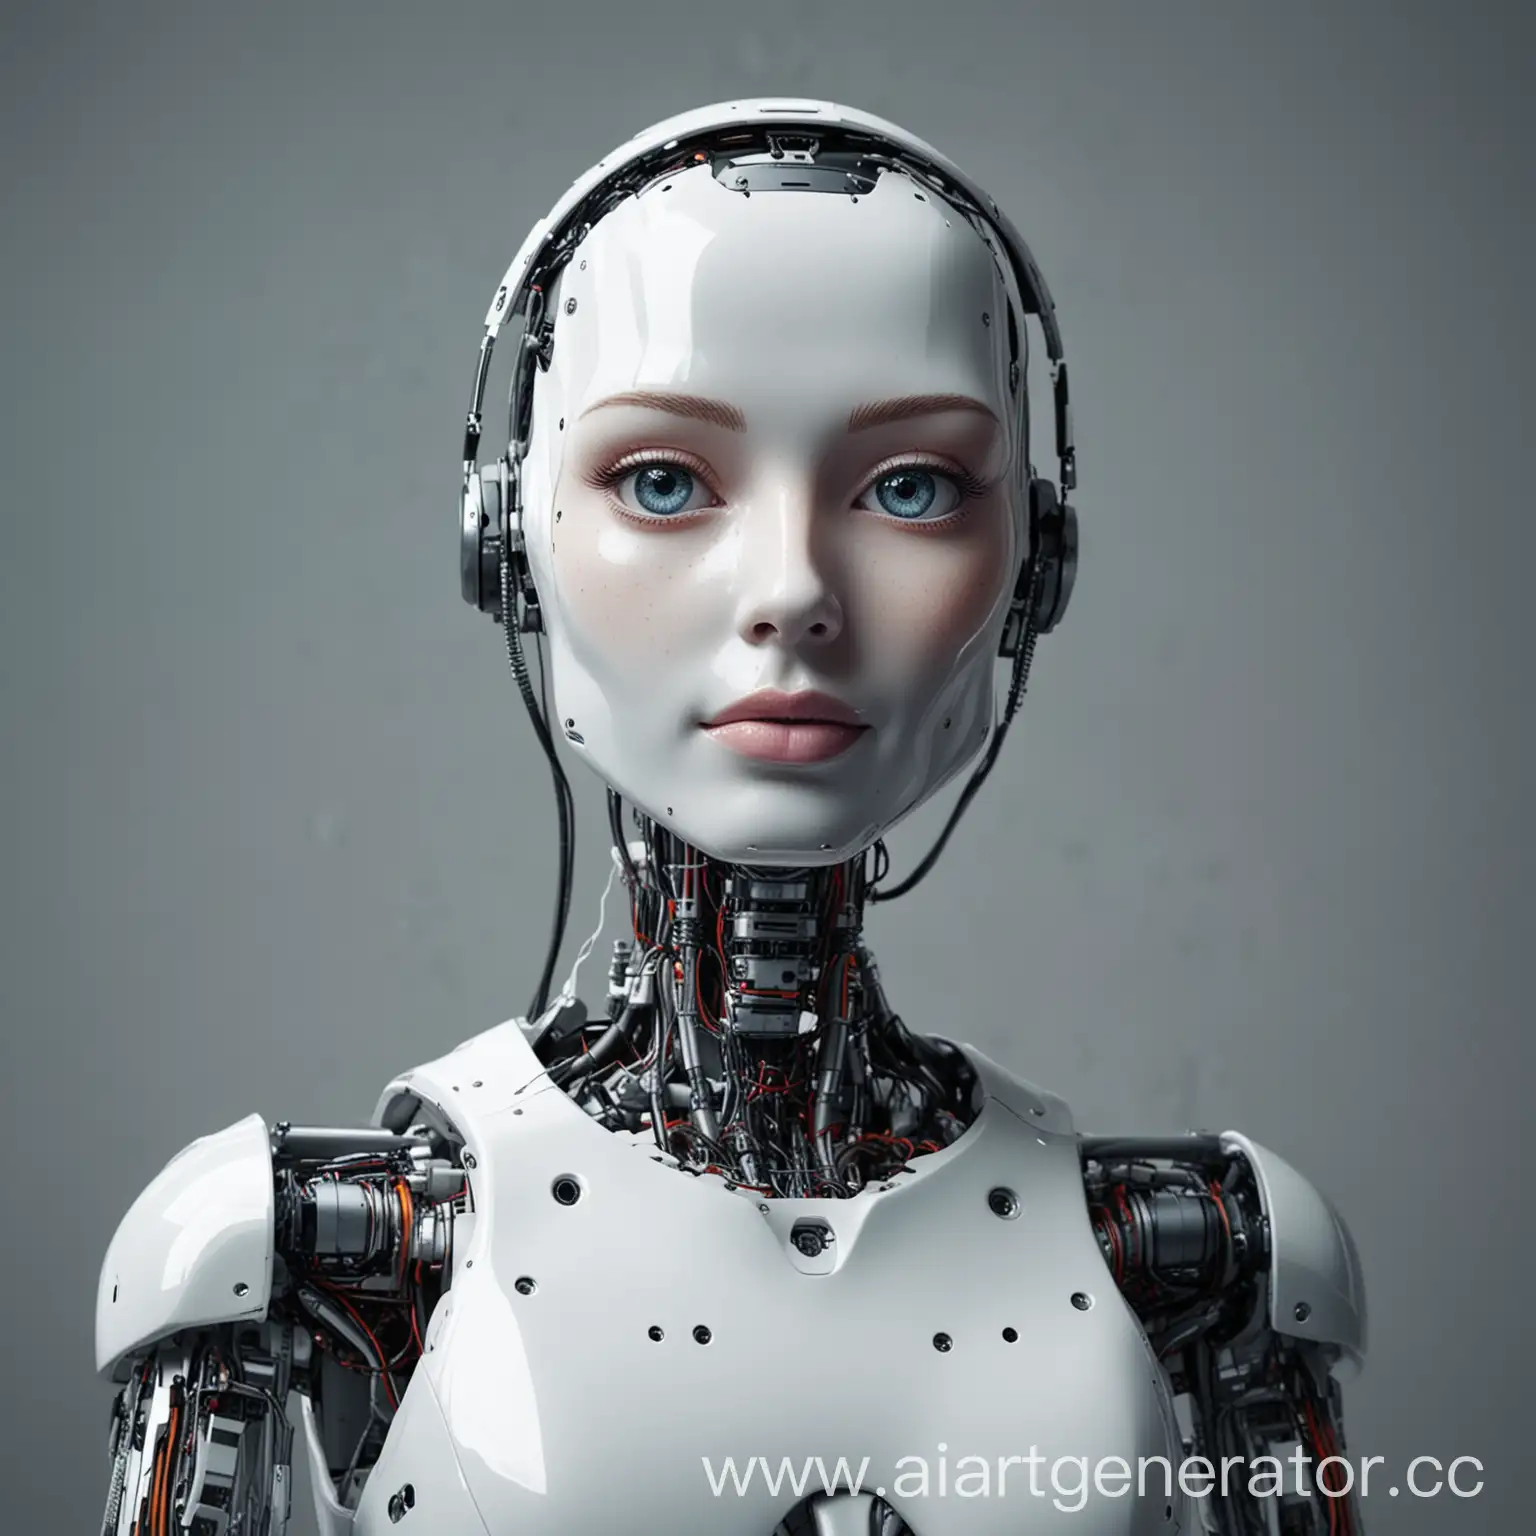 artificial intelligence in the form of a robot

